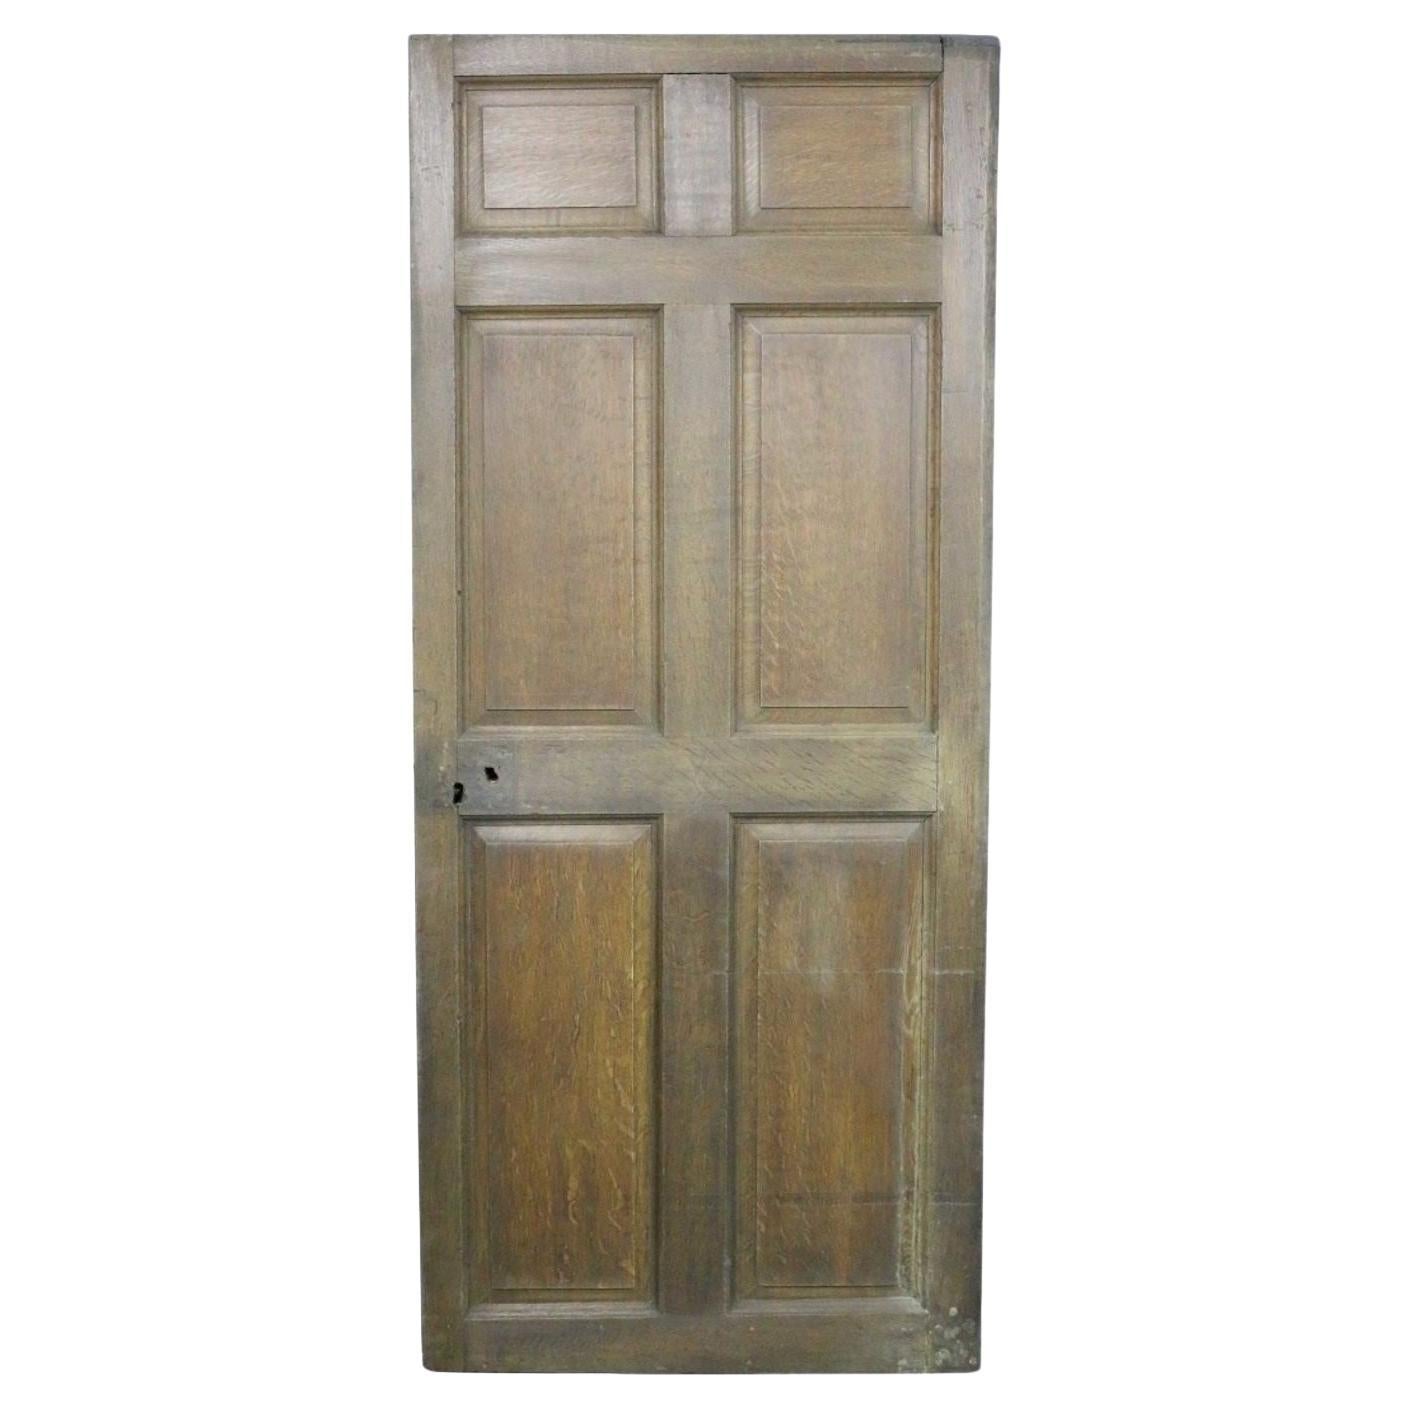 A Reclaimed Early 19th Century Oak Front Door For Sale